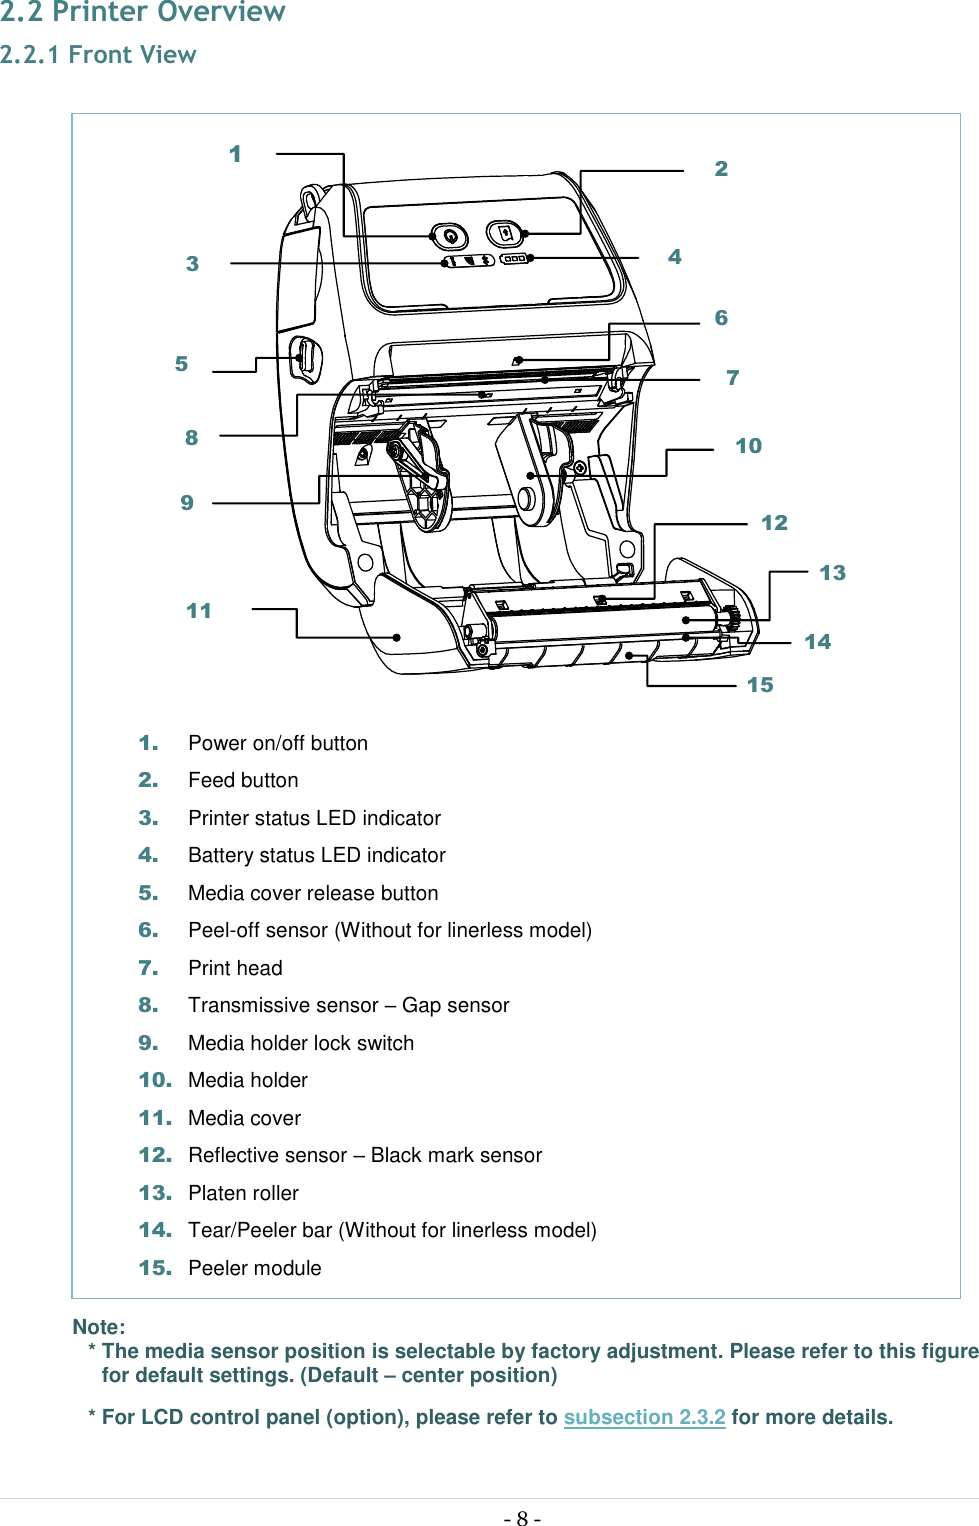  - 8 -  2.2 Printer Overview 2.2.1 Front View                     Note:  * The media sensor position is selectable by factory adjustment. Please refer to this figure for default settings. (Default – center position) * For LCD control panel (option), please refer to subsection 2.3.2 for more details.      1. Power on/off button 2. Feed button 3. Printer status LED indicator 4. Battery status LED indicator 5. Media cover release button 6. Peel-off sensor (Without for linerless model) 7. Print head 8. Transmissive sensor – Gap sensor 9. Media holder lock switch 10. Media holder 11. Media cover 12. Reflective sensor – Black mark sensor 13. Platen roller 14. Tear/Peeler bar (Without for linerless model) 15. Peeler module  9 2 1 3  Power LED indicator 4 6 8  Label roll guard 7  Print head 5 10  Platen 11  Platen 12  Platen 13  Platen 15  Platen 14  Platen 